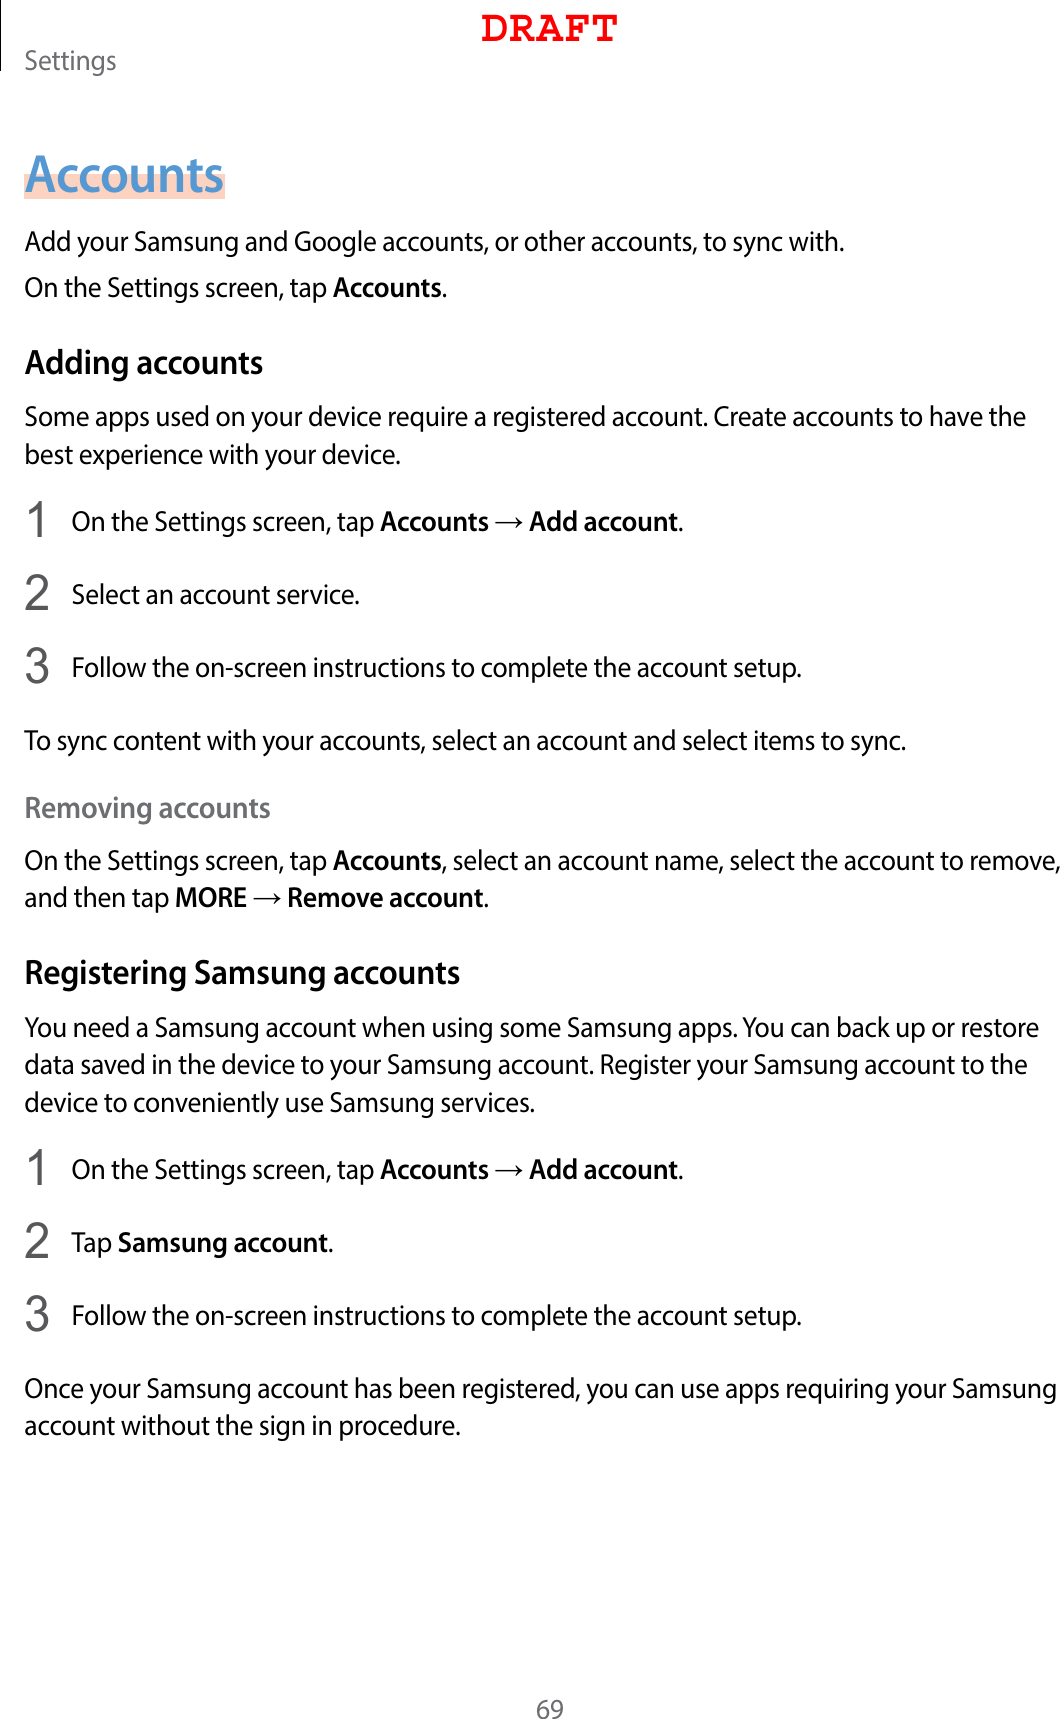 Settings69AccountsAdd your Samsung and Google accounts, or other accounts, to sync with.On the Settings screen, tap Accounts.Adding accountsSome apps used on your device require a registered account. Create accounts to have the best experience with your device.1  On the Settings screen, tap Accounts → Add account.2  Select an account service.3  Follow the on-screen instructions to complete the account setup.To sync content with your accounts, select an account and select items to sync.Removing accountsOn the Settings screen, tap Accounts, select an account name, select the account to remove, and then tap MORE → Remove account.Registering Samsung accountsYou need a Samsung account when using some Samsung apps. You can back up or restore data saved in the device to your Samsung account. Register your Samsung account to the device to conveniently use Samsung services.1  On the Settings screen, tap Accounts → Add account.2  Tap Samsung account.3  Follow the on-screen instructions to complete the account setup.Once your Samsung account has been registered, you can use apps requiring your Samsung account without the sign in procedure.DRAFT